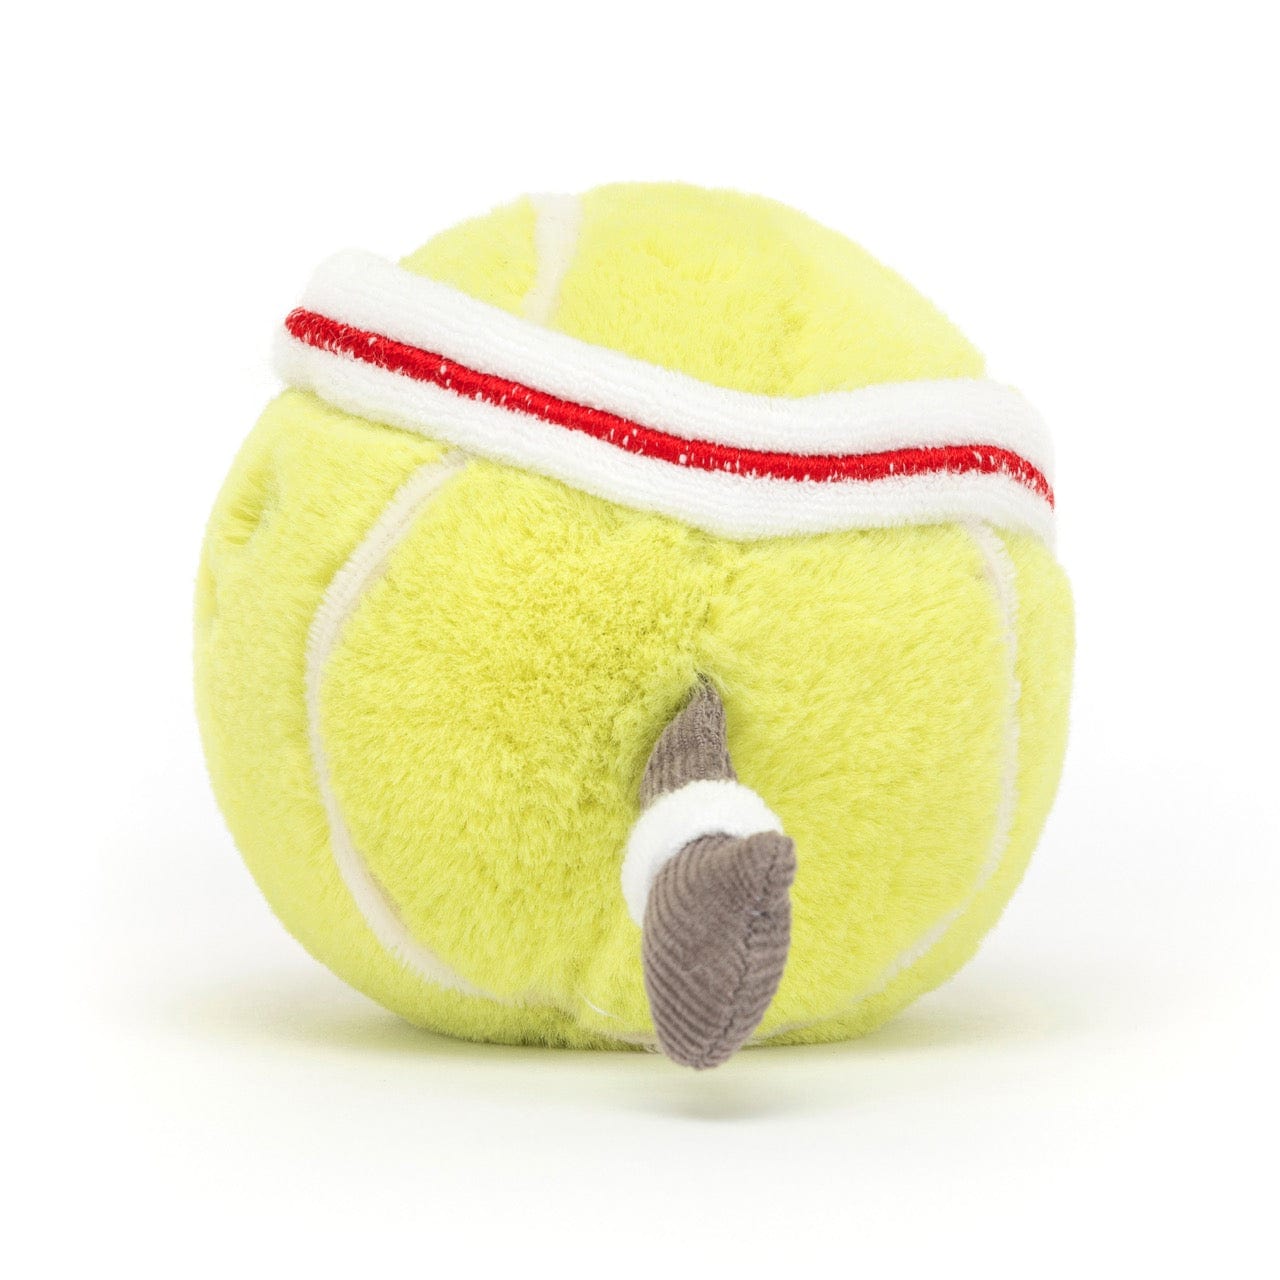 Amuseable Sports Tennis Ball JellyCat Lil Tulips